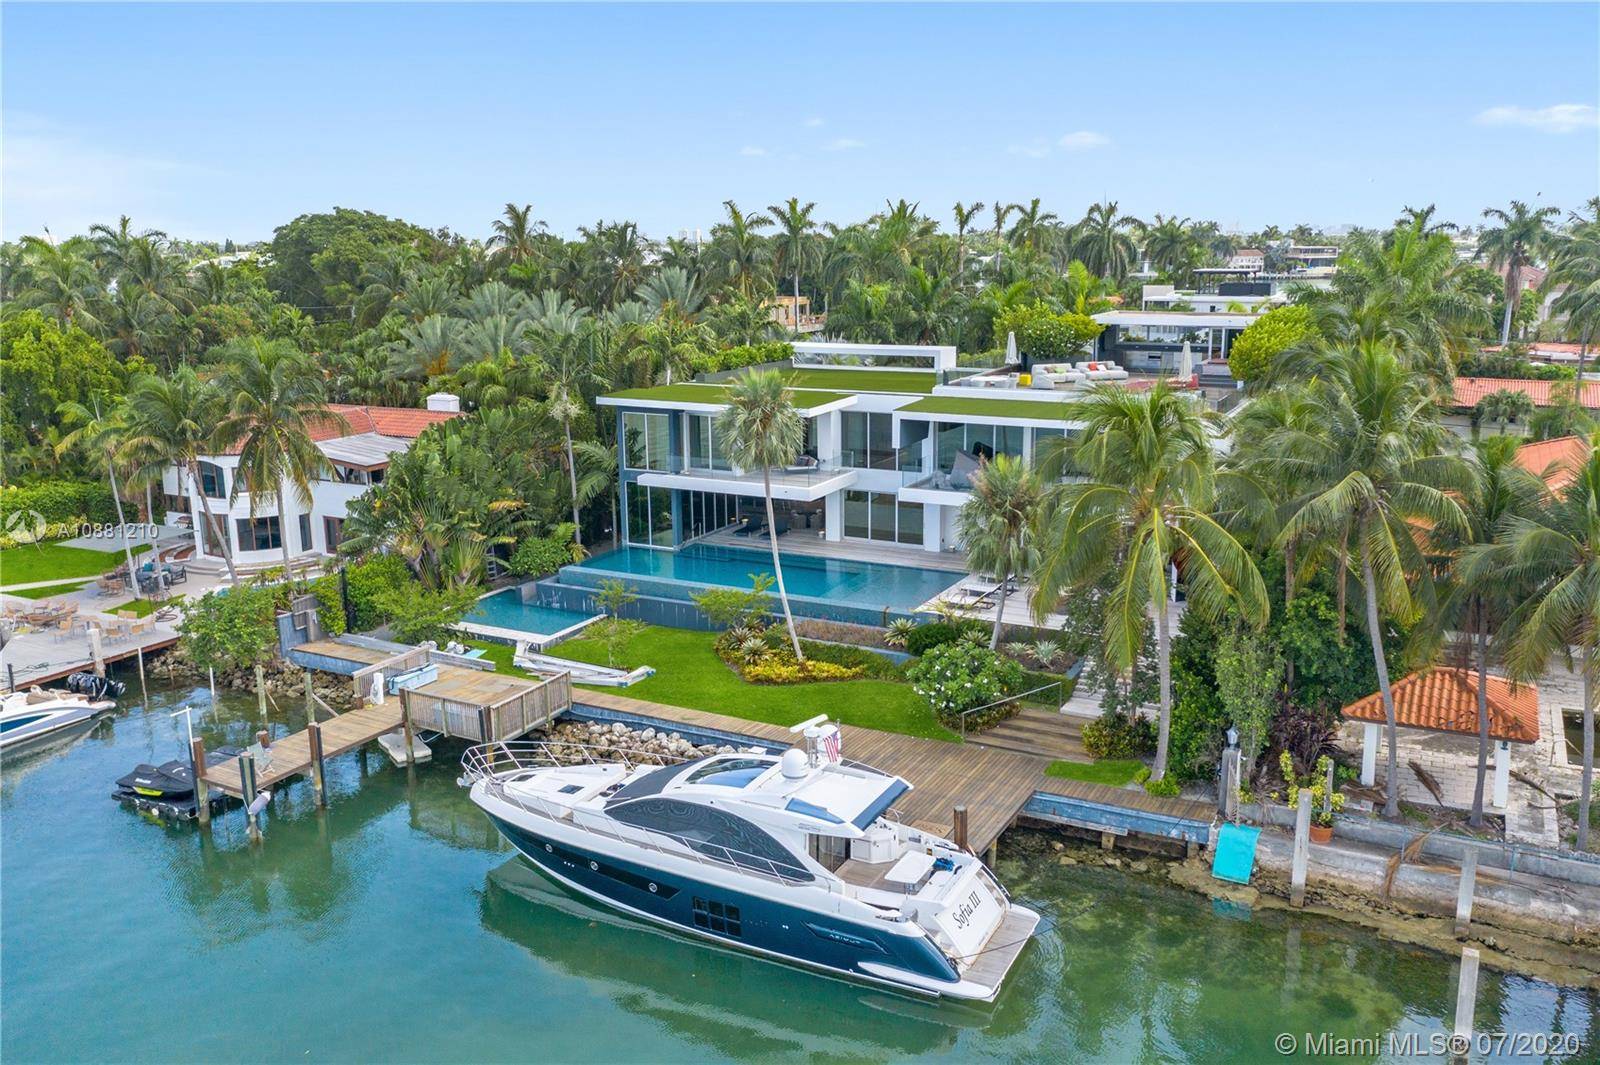 Exclusive Hibiscus Island Miami Beach modern architectural gem built 2016 on double lot w 122 ft of water frontage, South orientation.